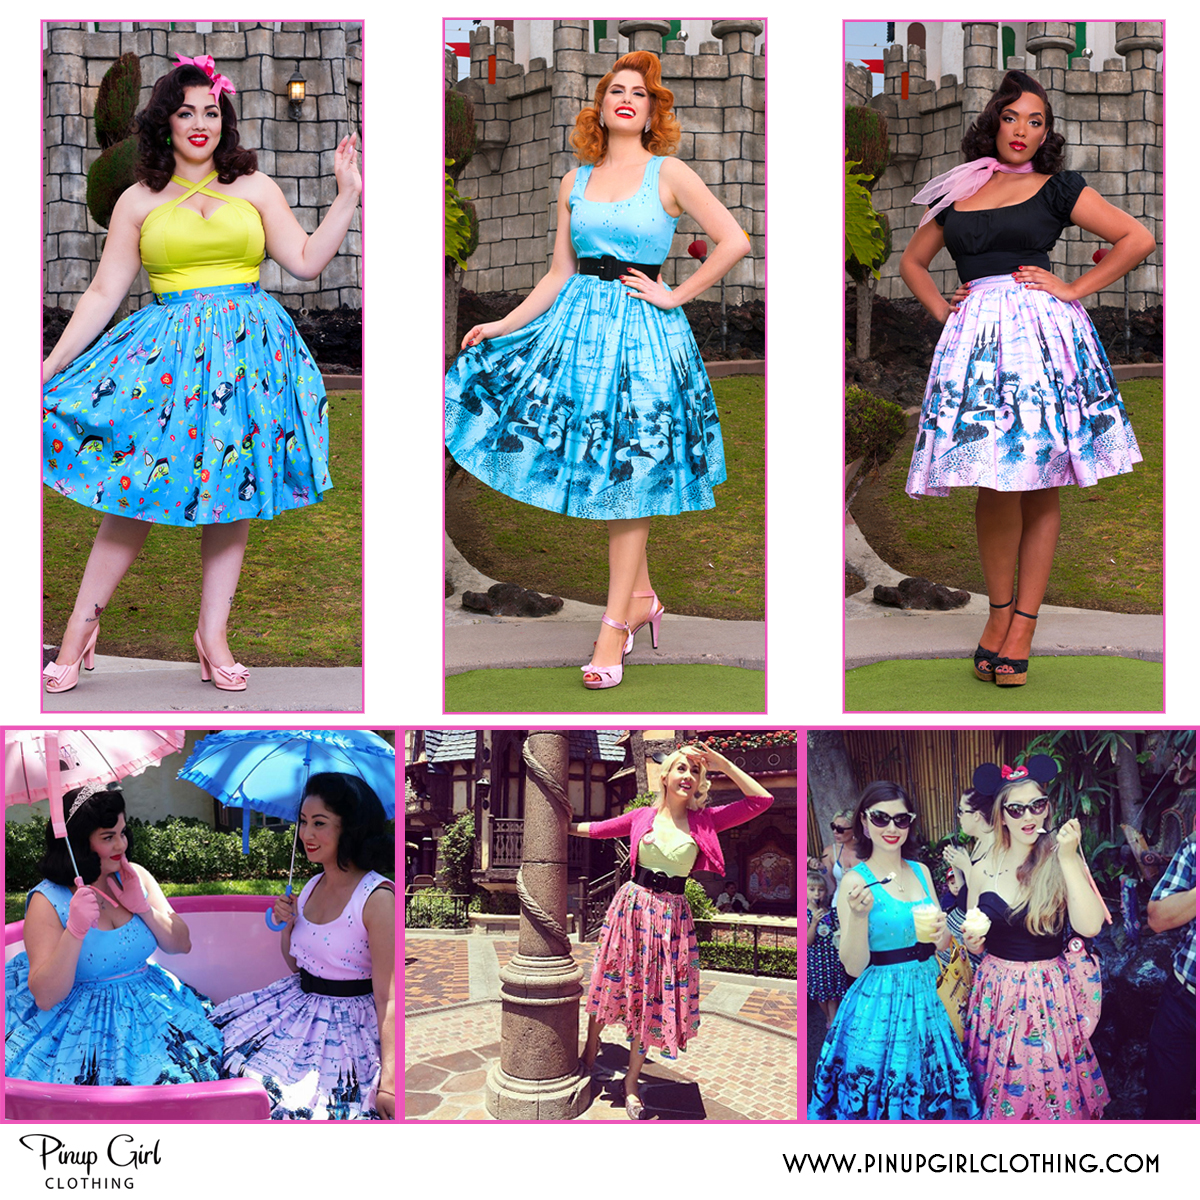 The Fairytale Fantasy Collection